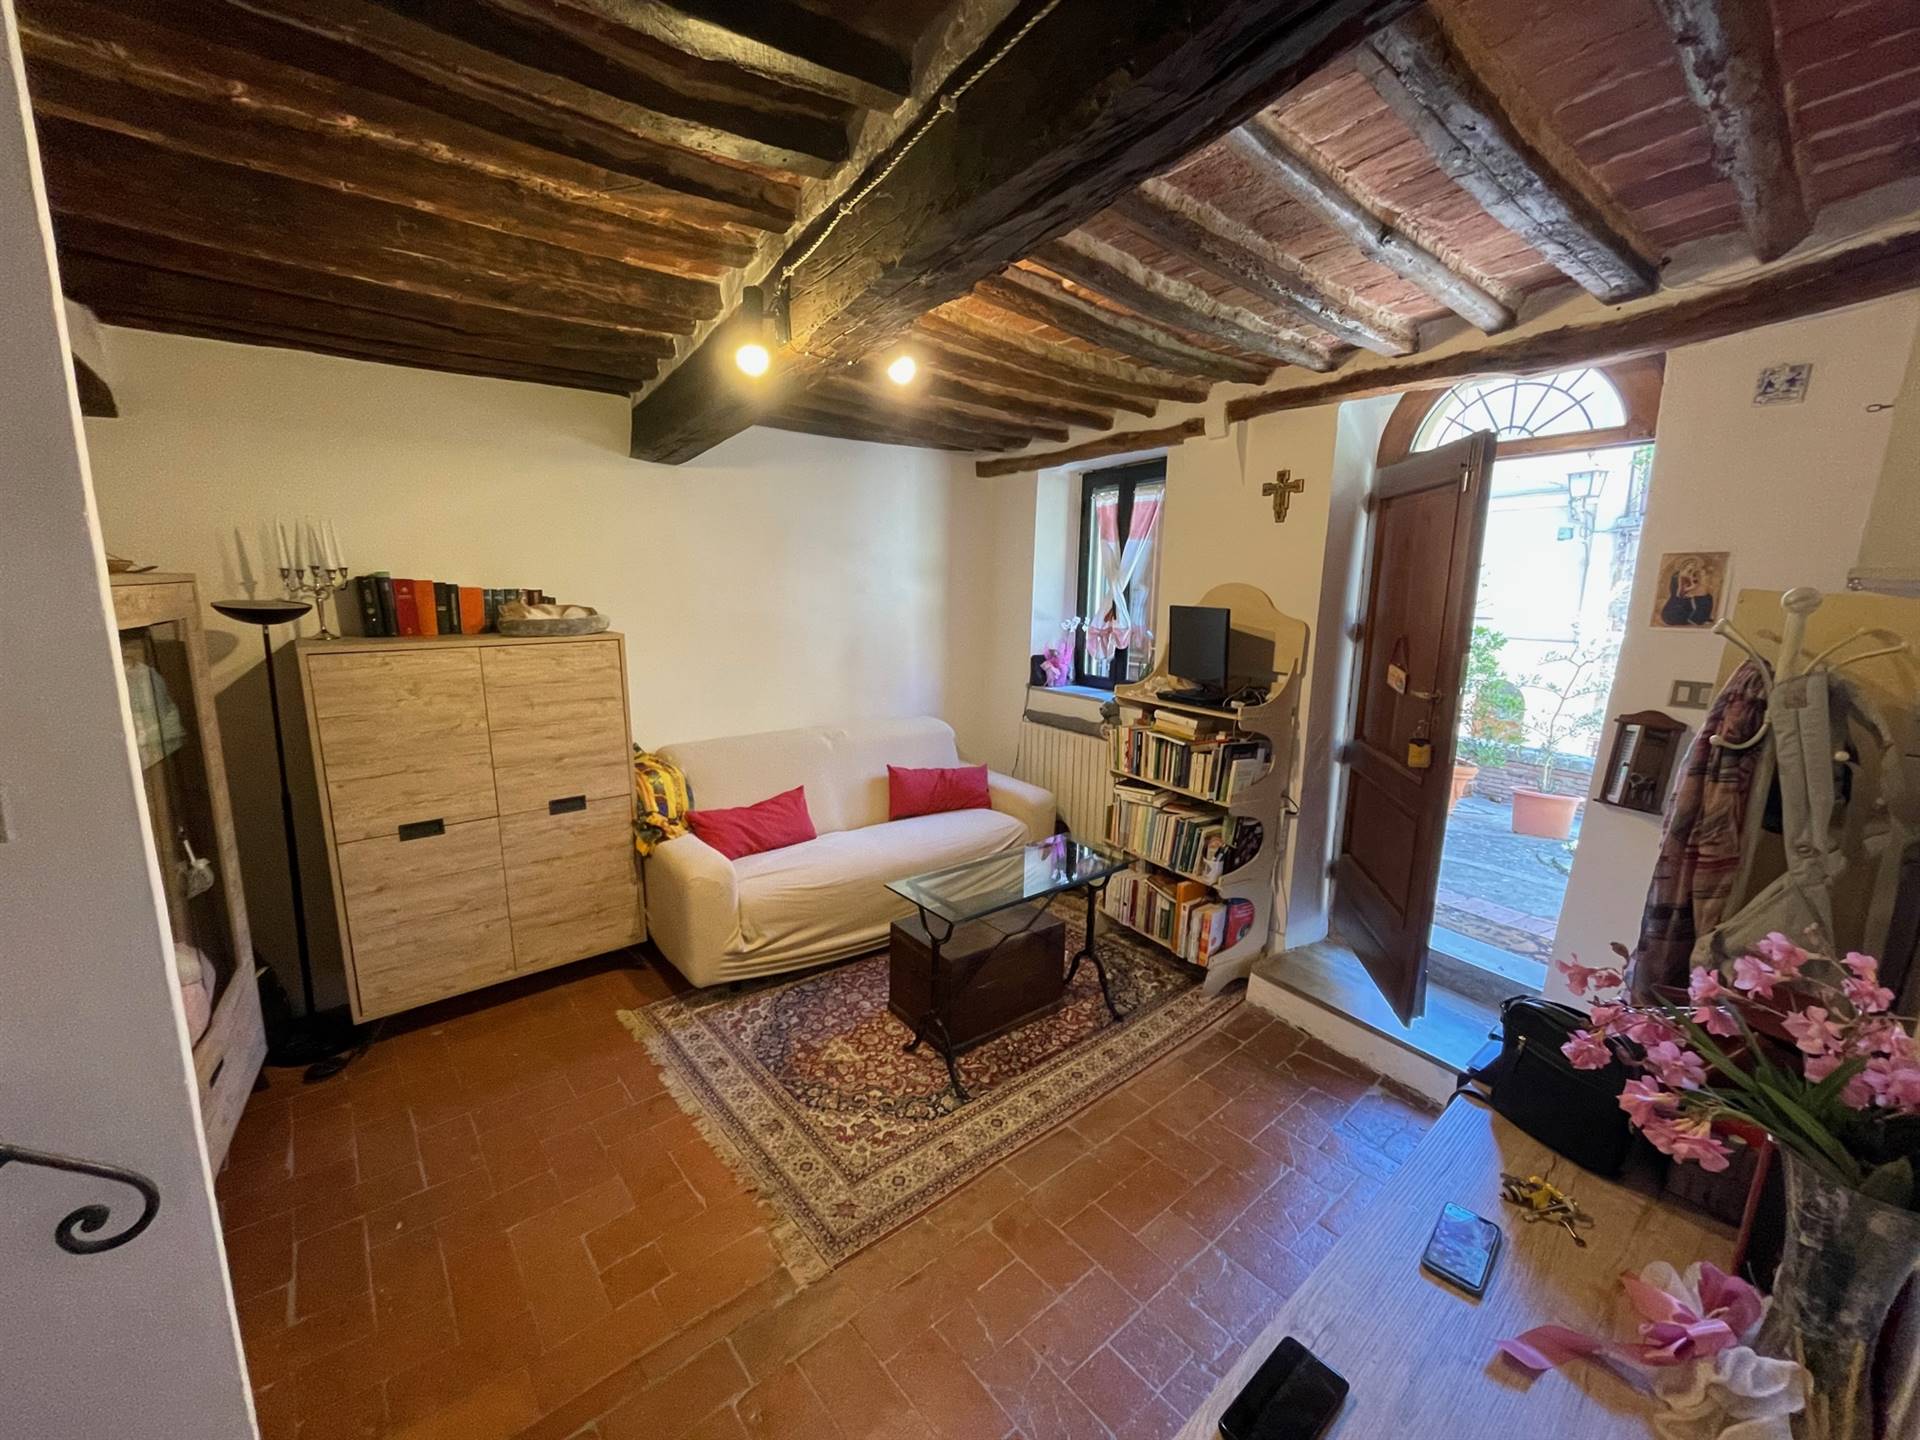 Self-catering apartments TOSCANA Siena